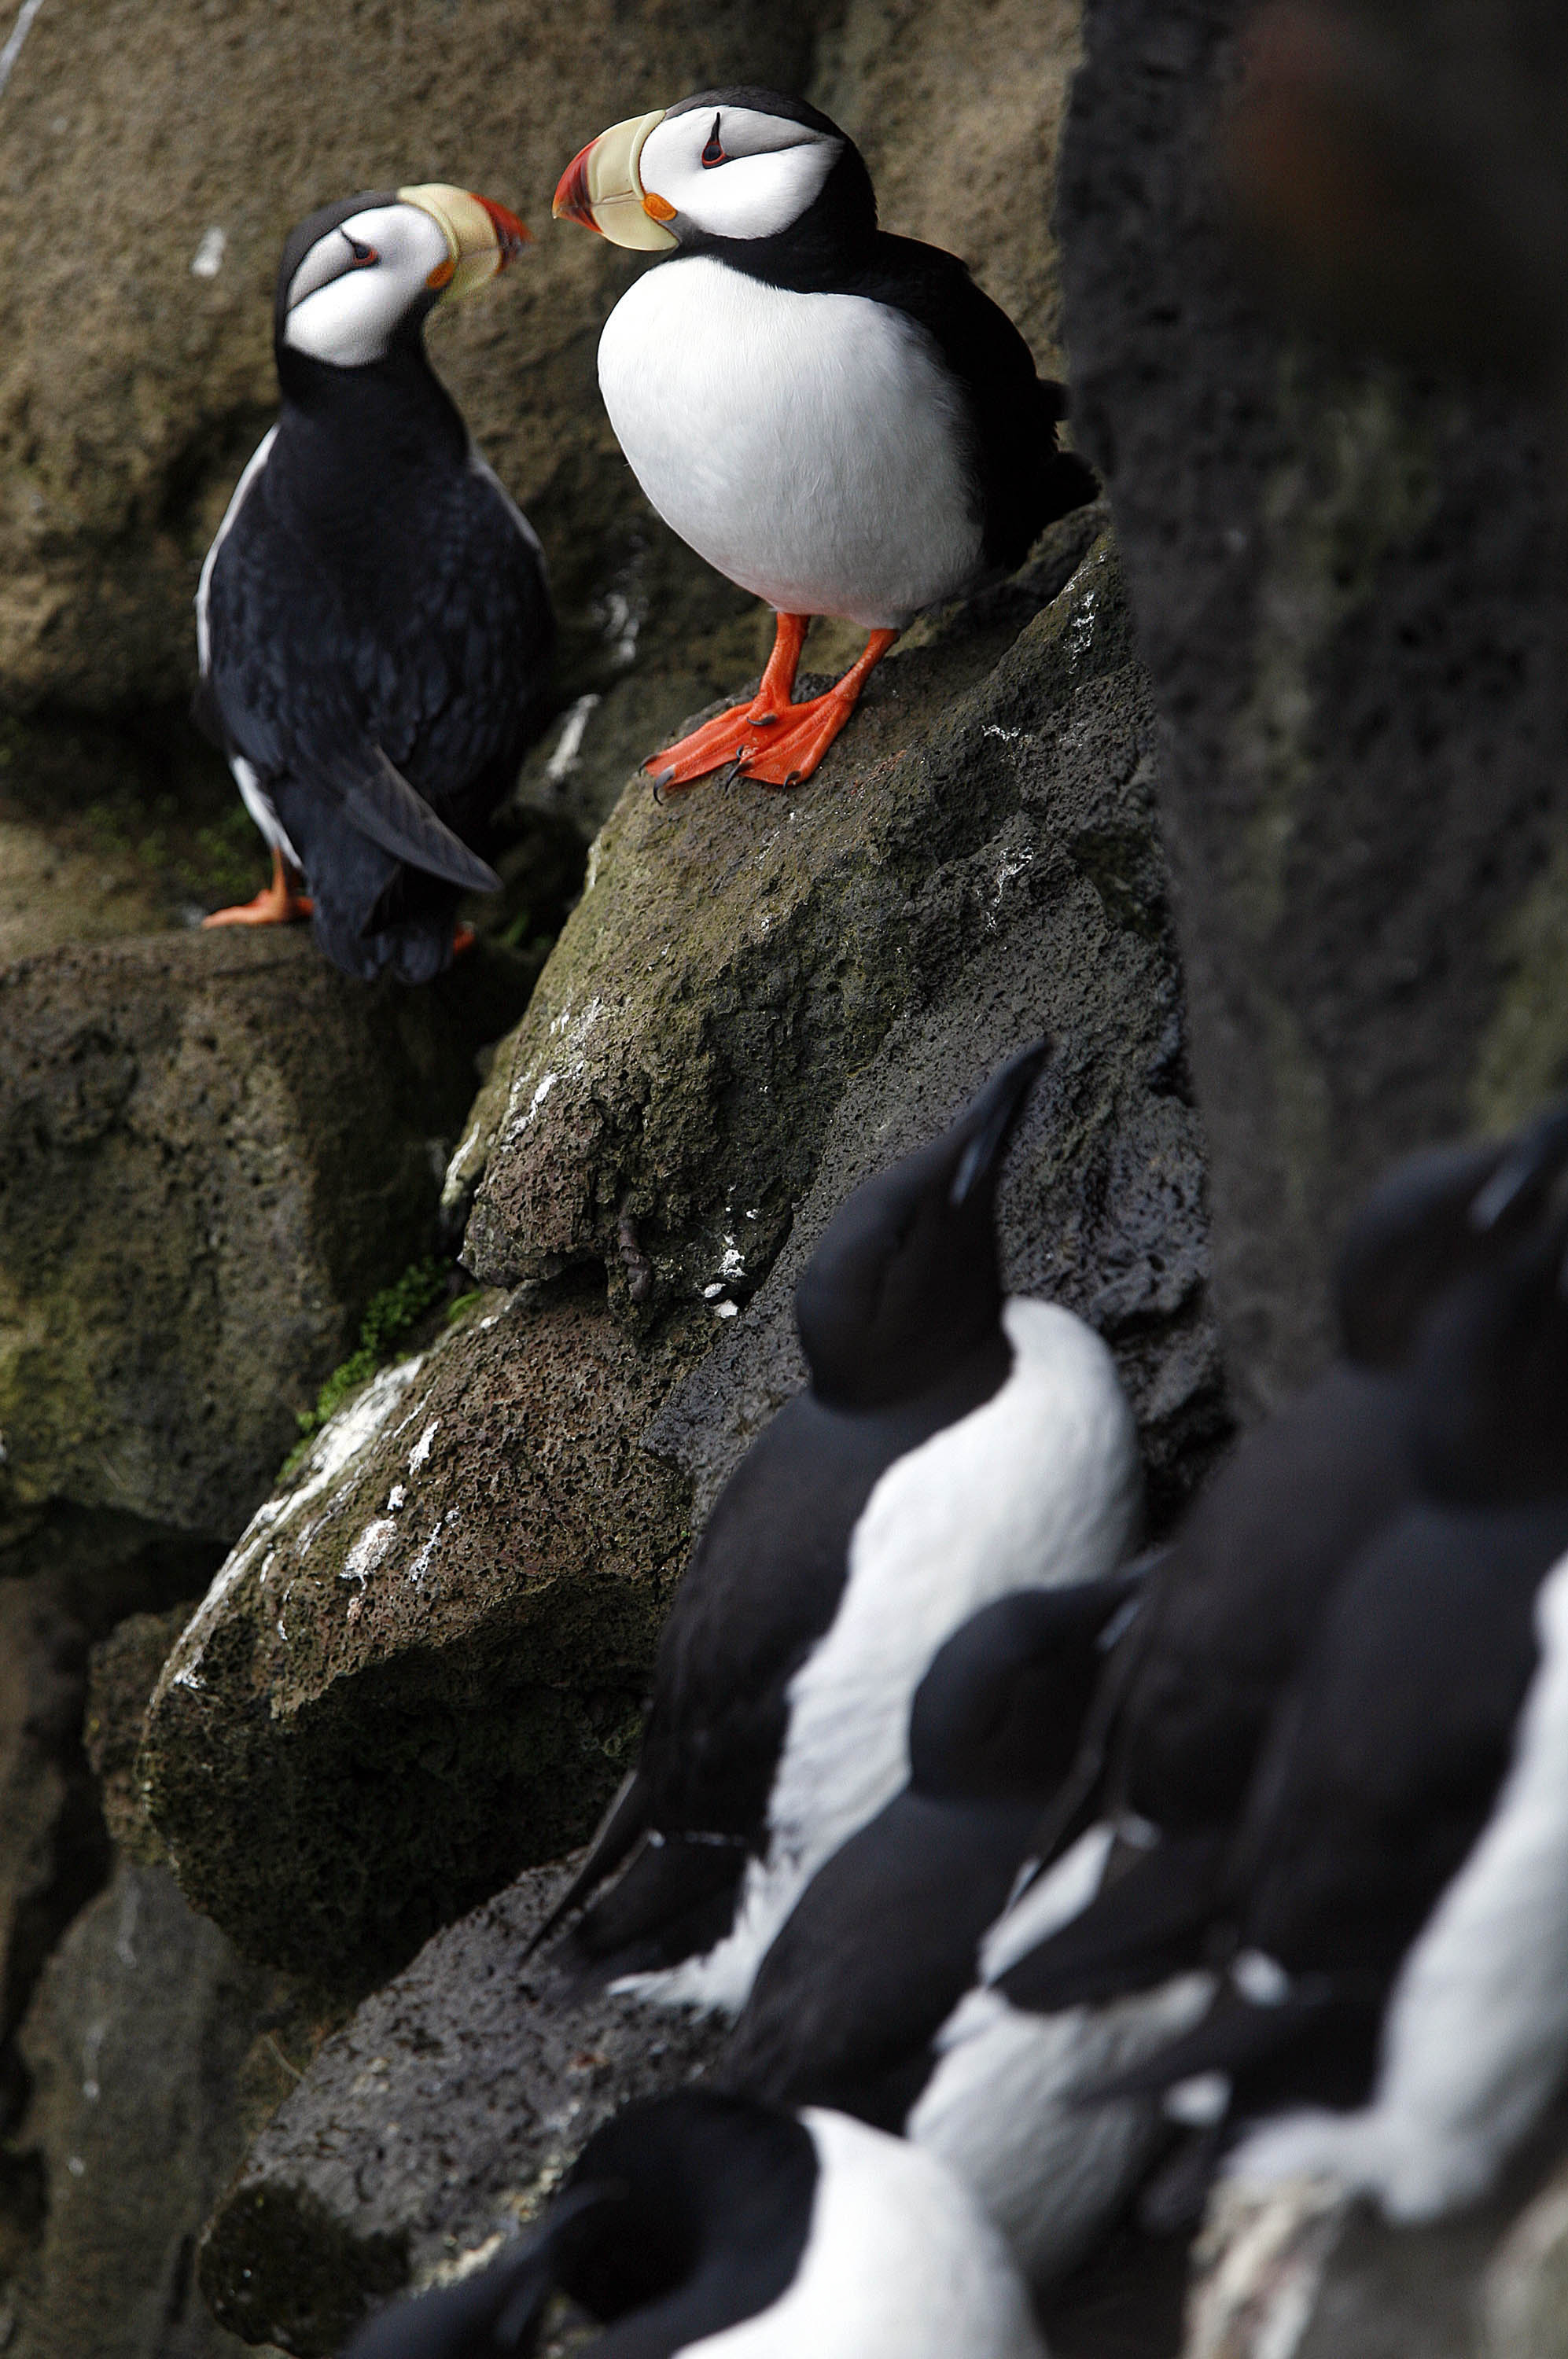 In this June 4, 2008 file photo, puffins sit above murrs on the cliff on St. Paul Island, Alaska. The number of seabirds, including gulls, puffins and auklets, has dropped significantly in the Gulf of Alaska and northeast Bering Sea, a possible consequence of warmer waters, according to a preliminary federal analysis of nearly 40 years of surveys. U.S. Geological Survey experts found the seabird population density declined 2 percent annually from 1975 to 2012 in the northeast North Pacific.